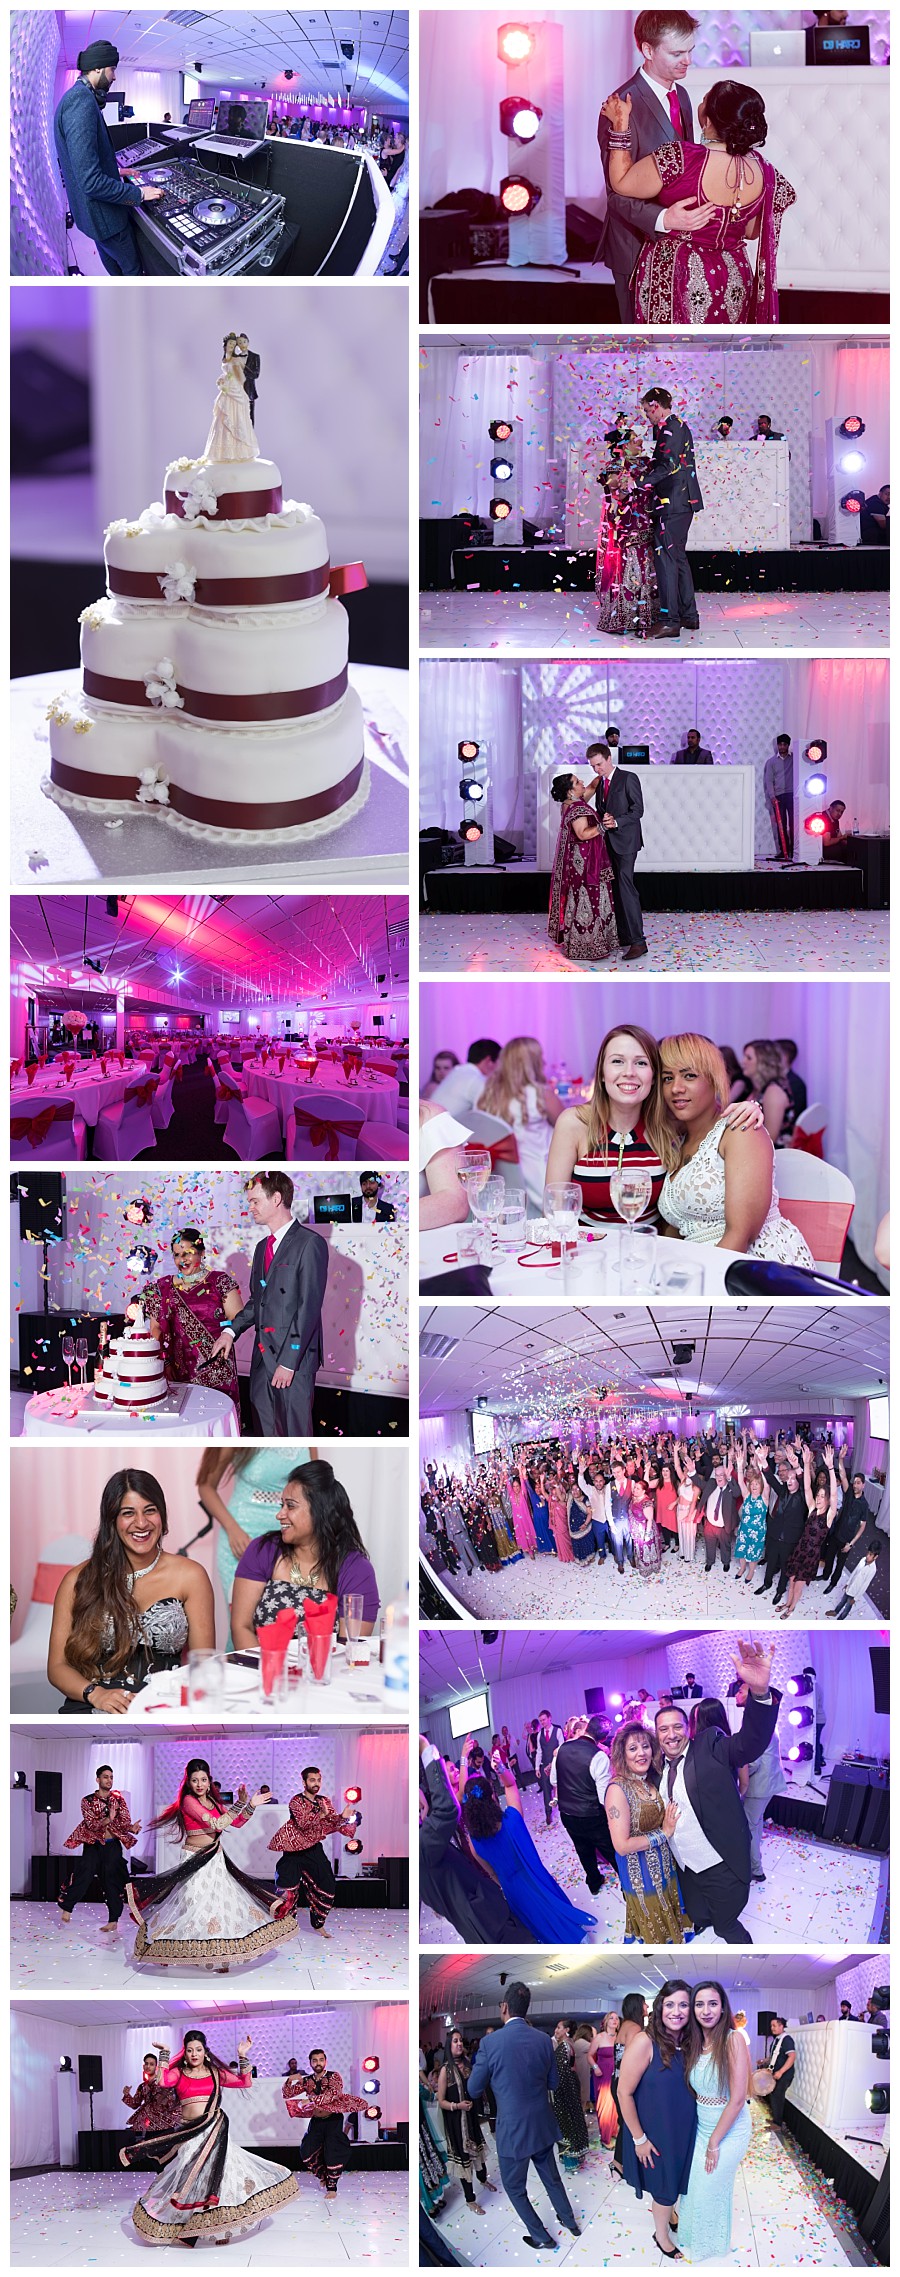 photographer aria suite Leeds, recommended photographers Aria Suite weddings